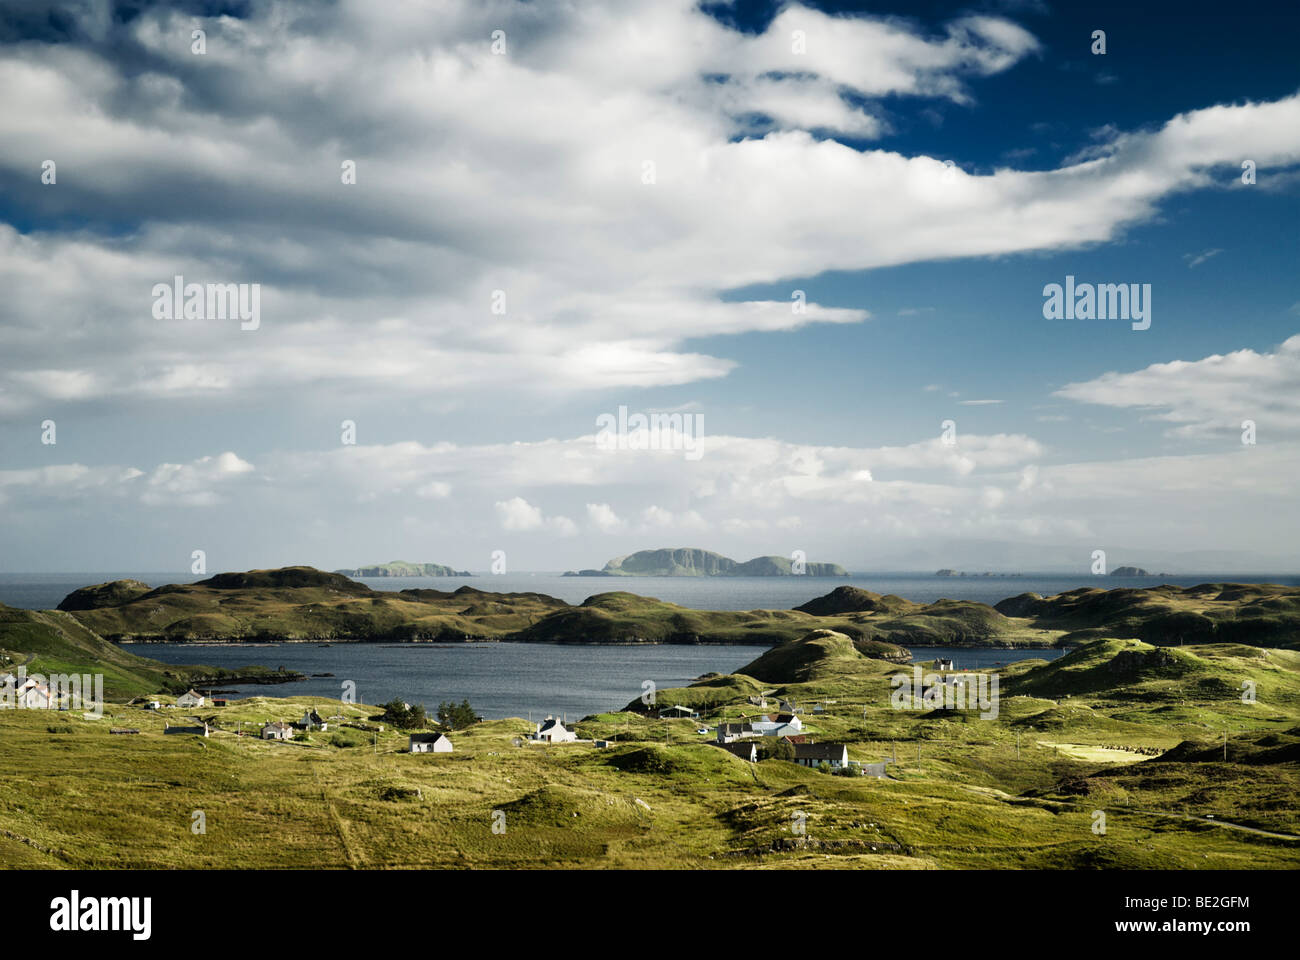 Lemreway on the Isle of Lewis with the Shiant Islands in the background Stock Photo